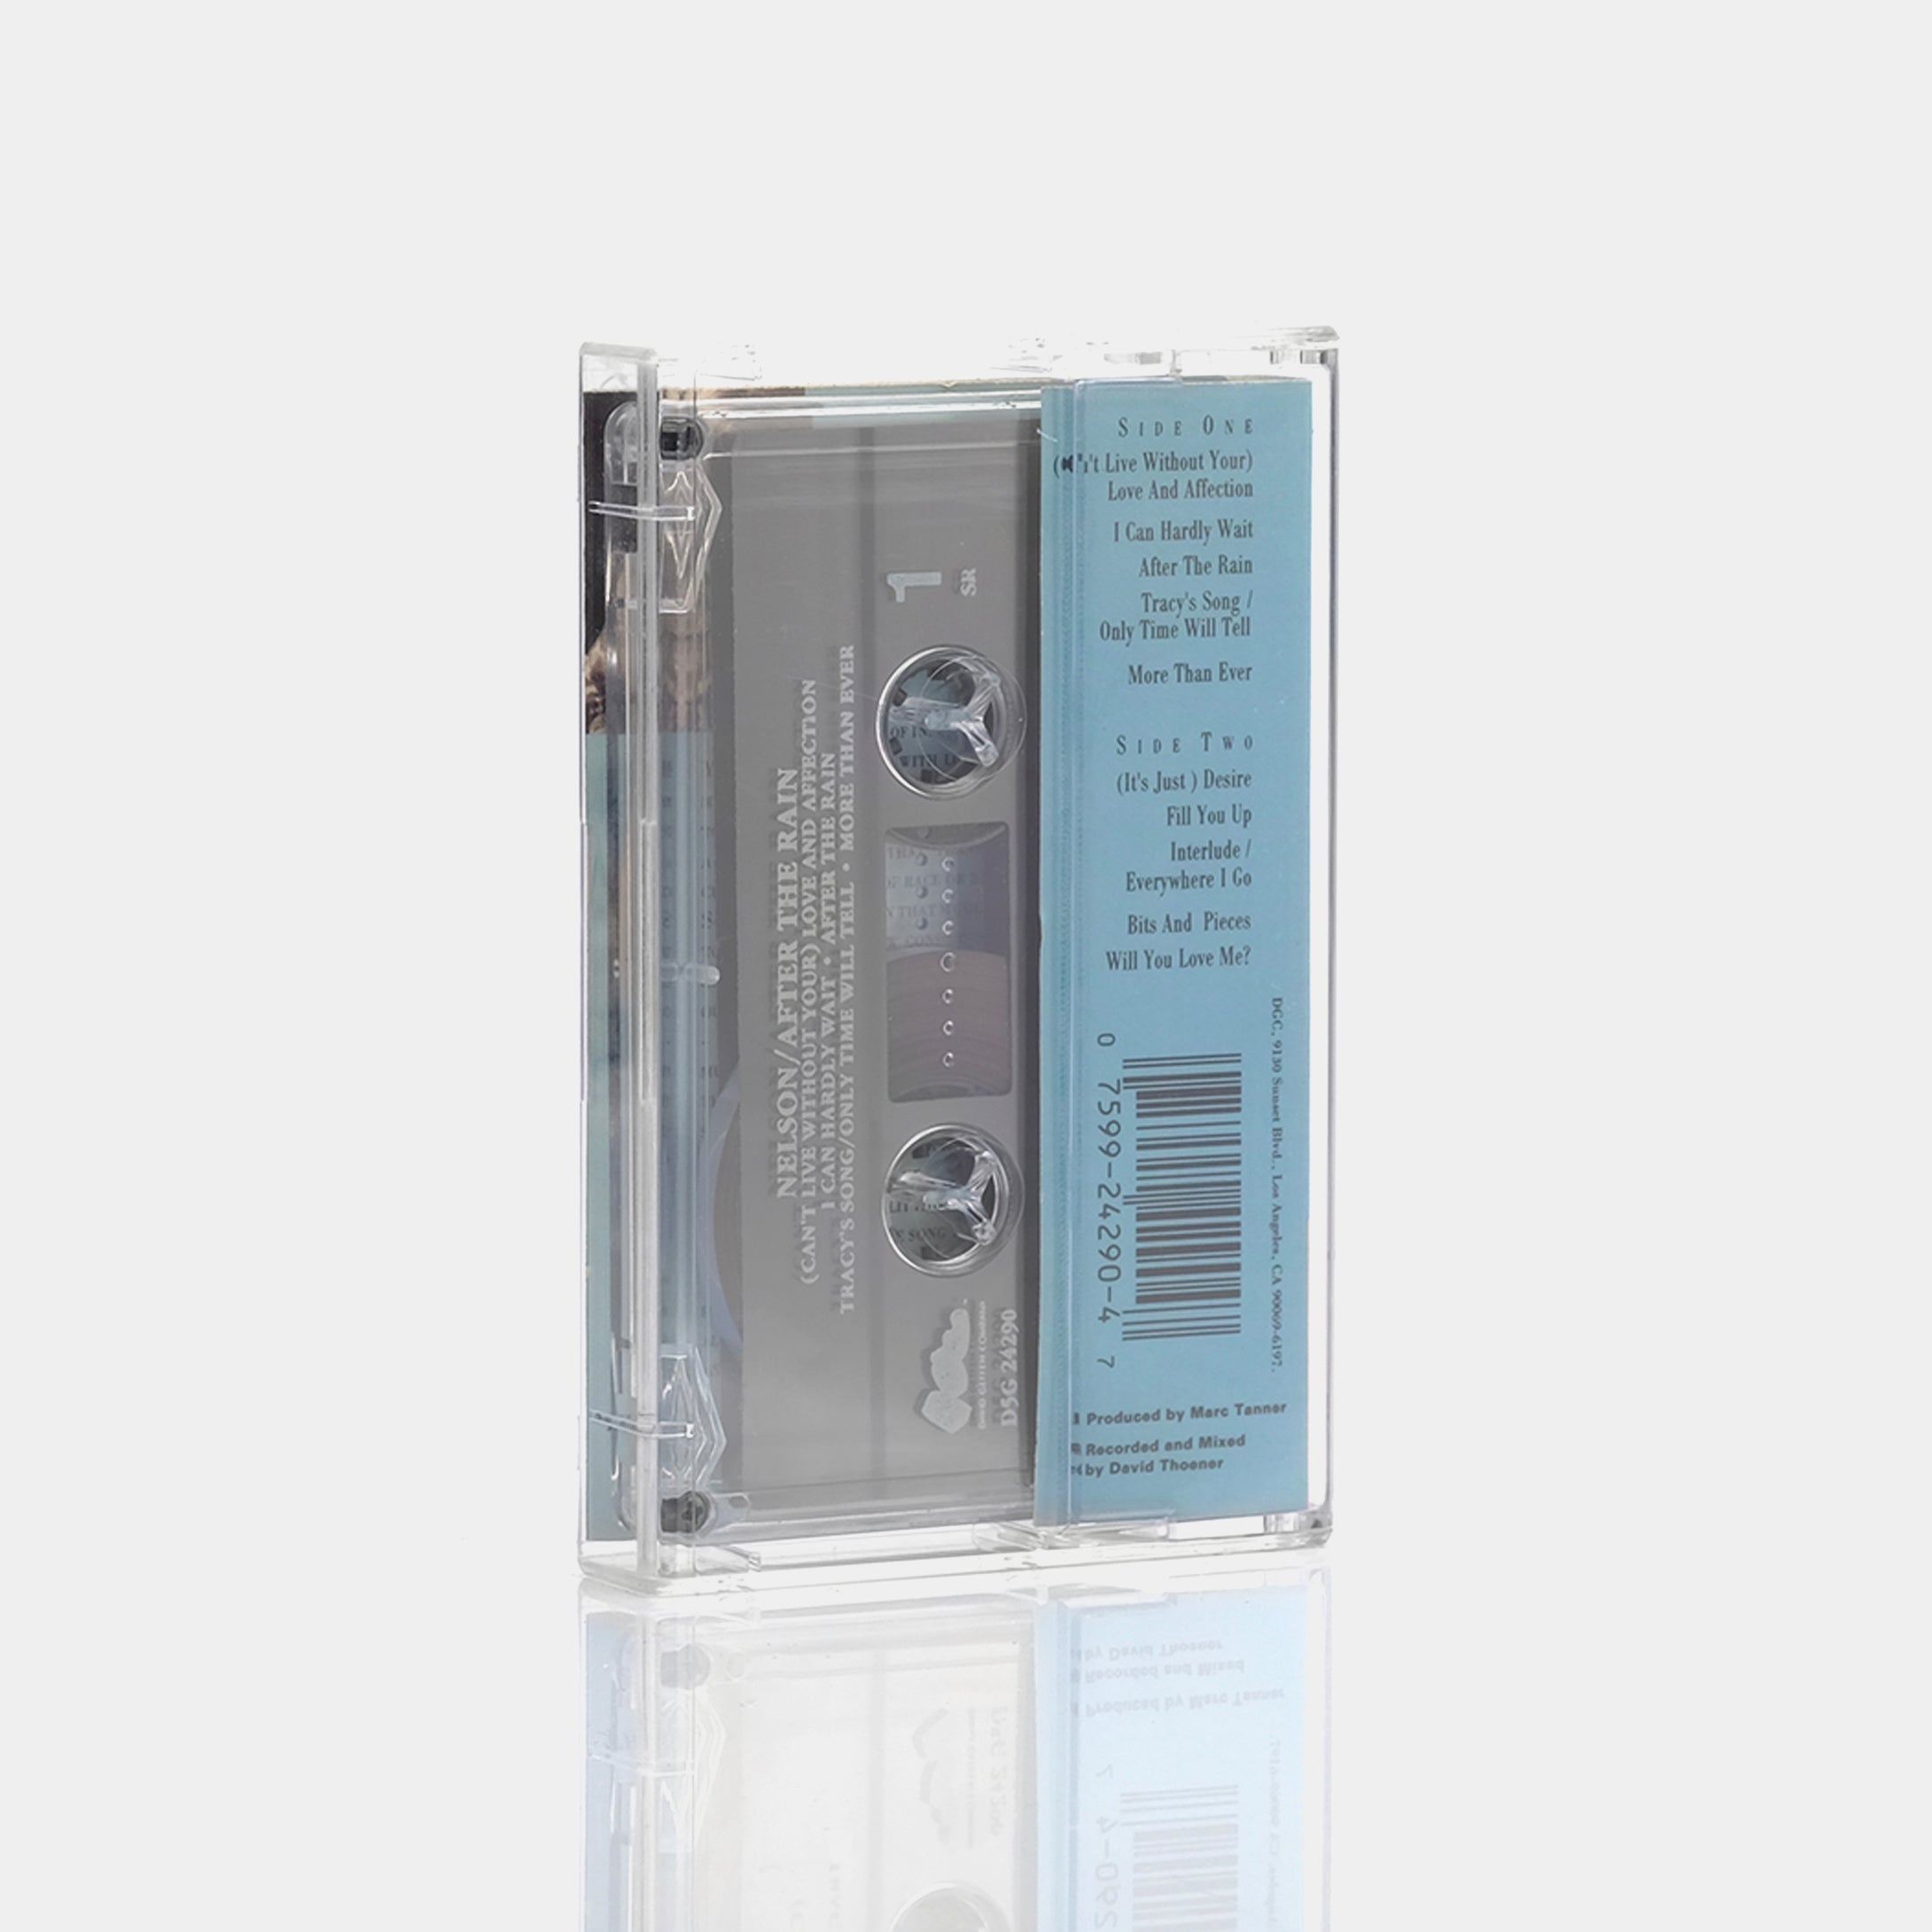 Nelson - After The Rain Cassette Tape